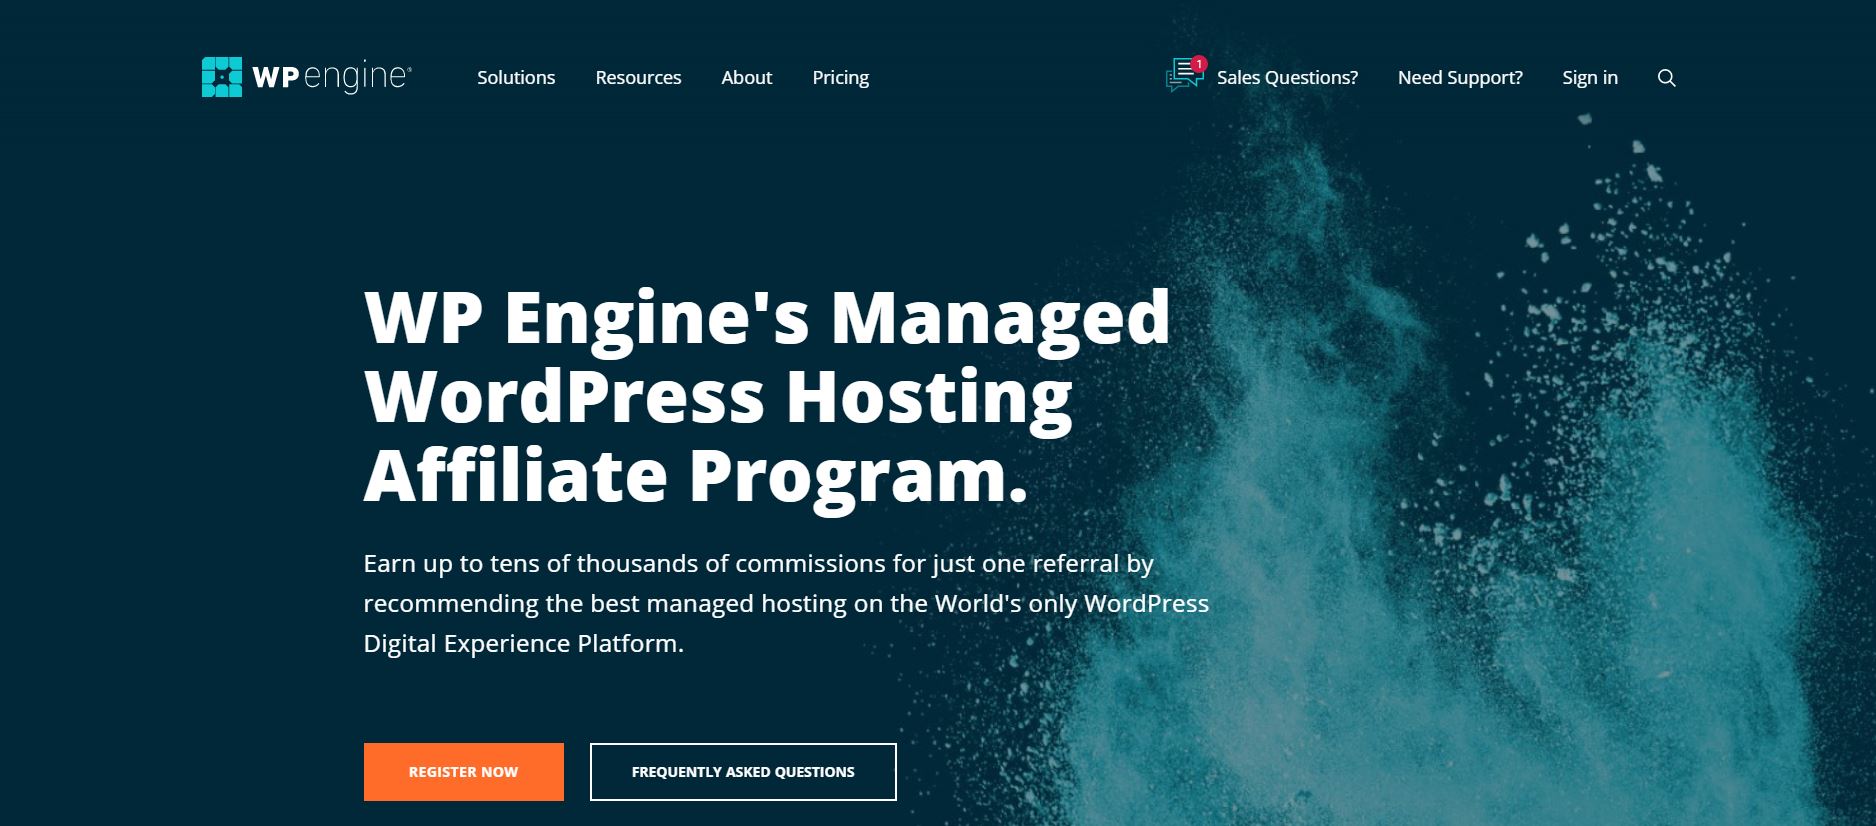 WP Engine affiliate page